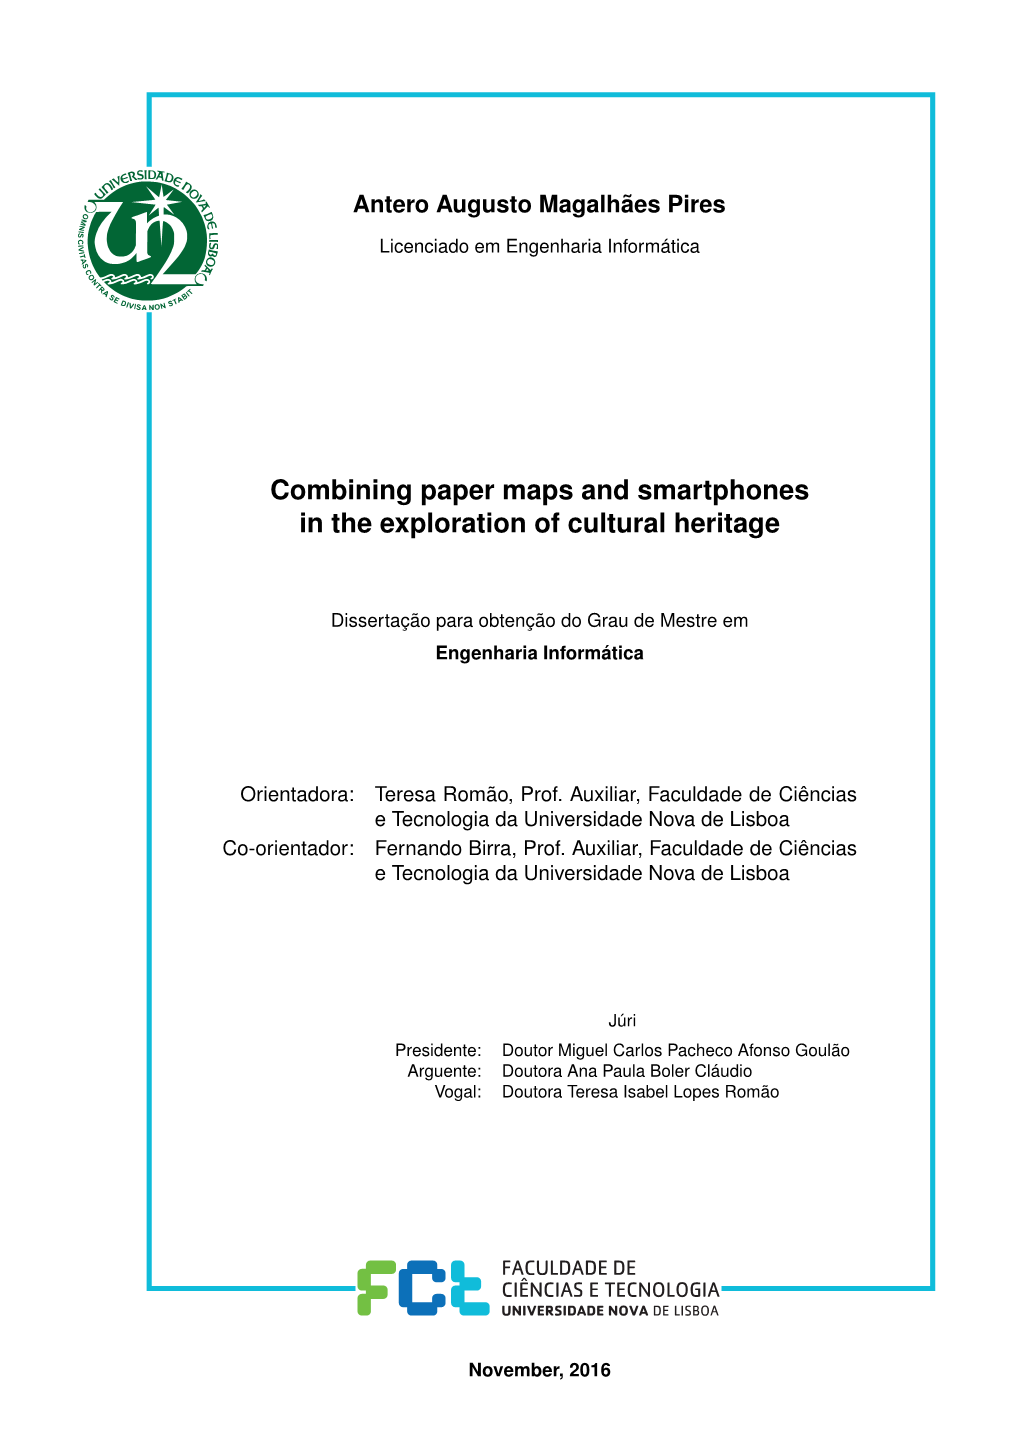 Combining Paper Maps and Smartphones in the Exploration of Cultural Heritage